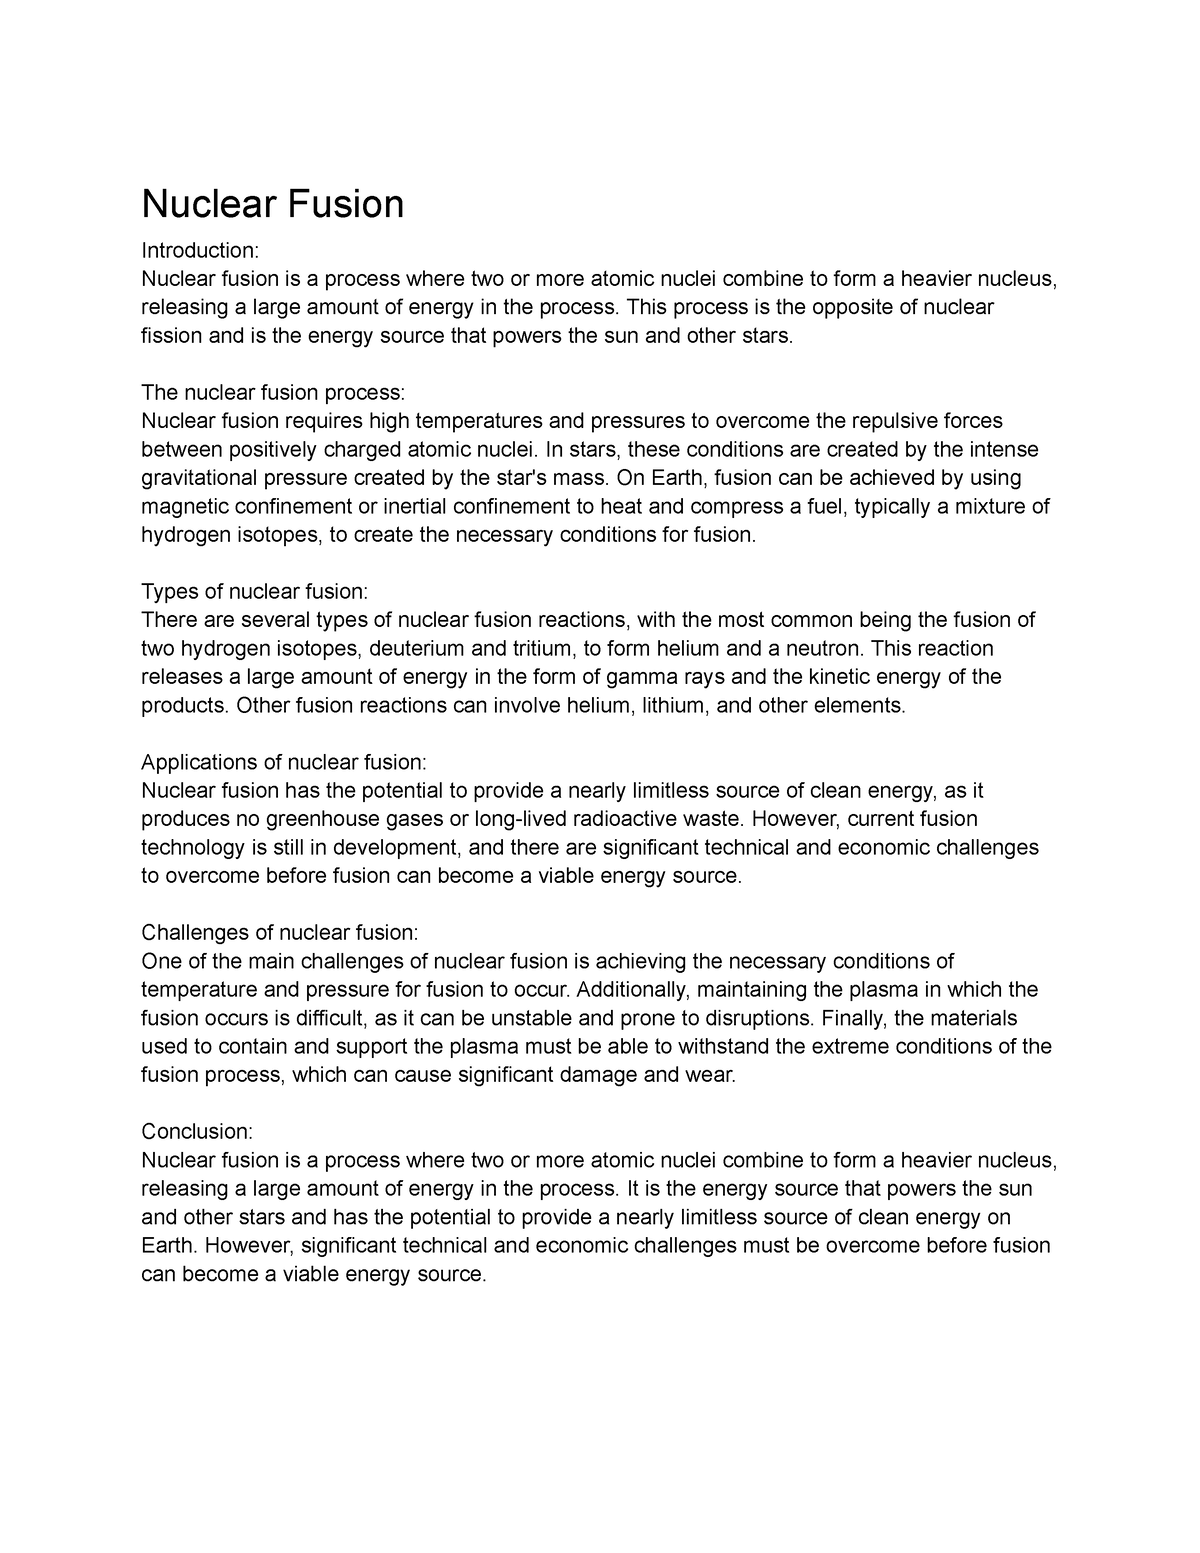 General Physics III (PHY-2040) Lecture 18 - Nuclear Fusion - Nuclear ...